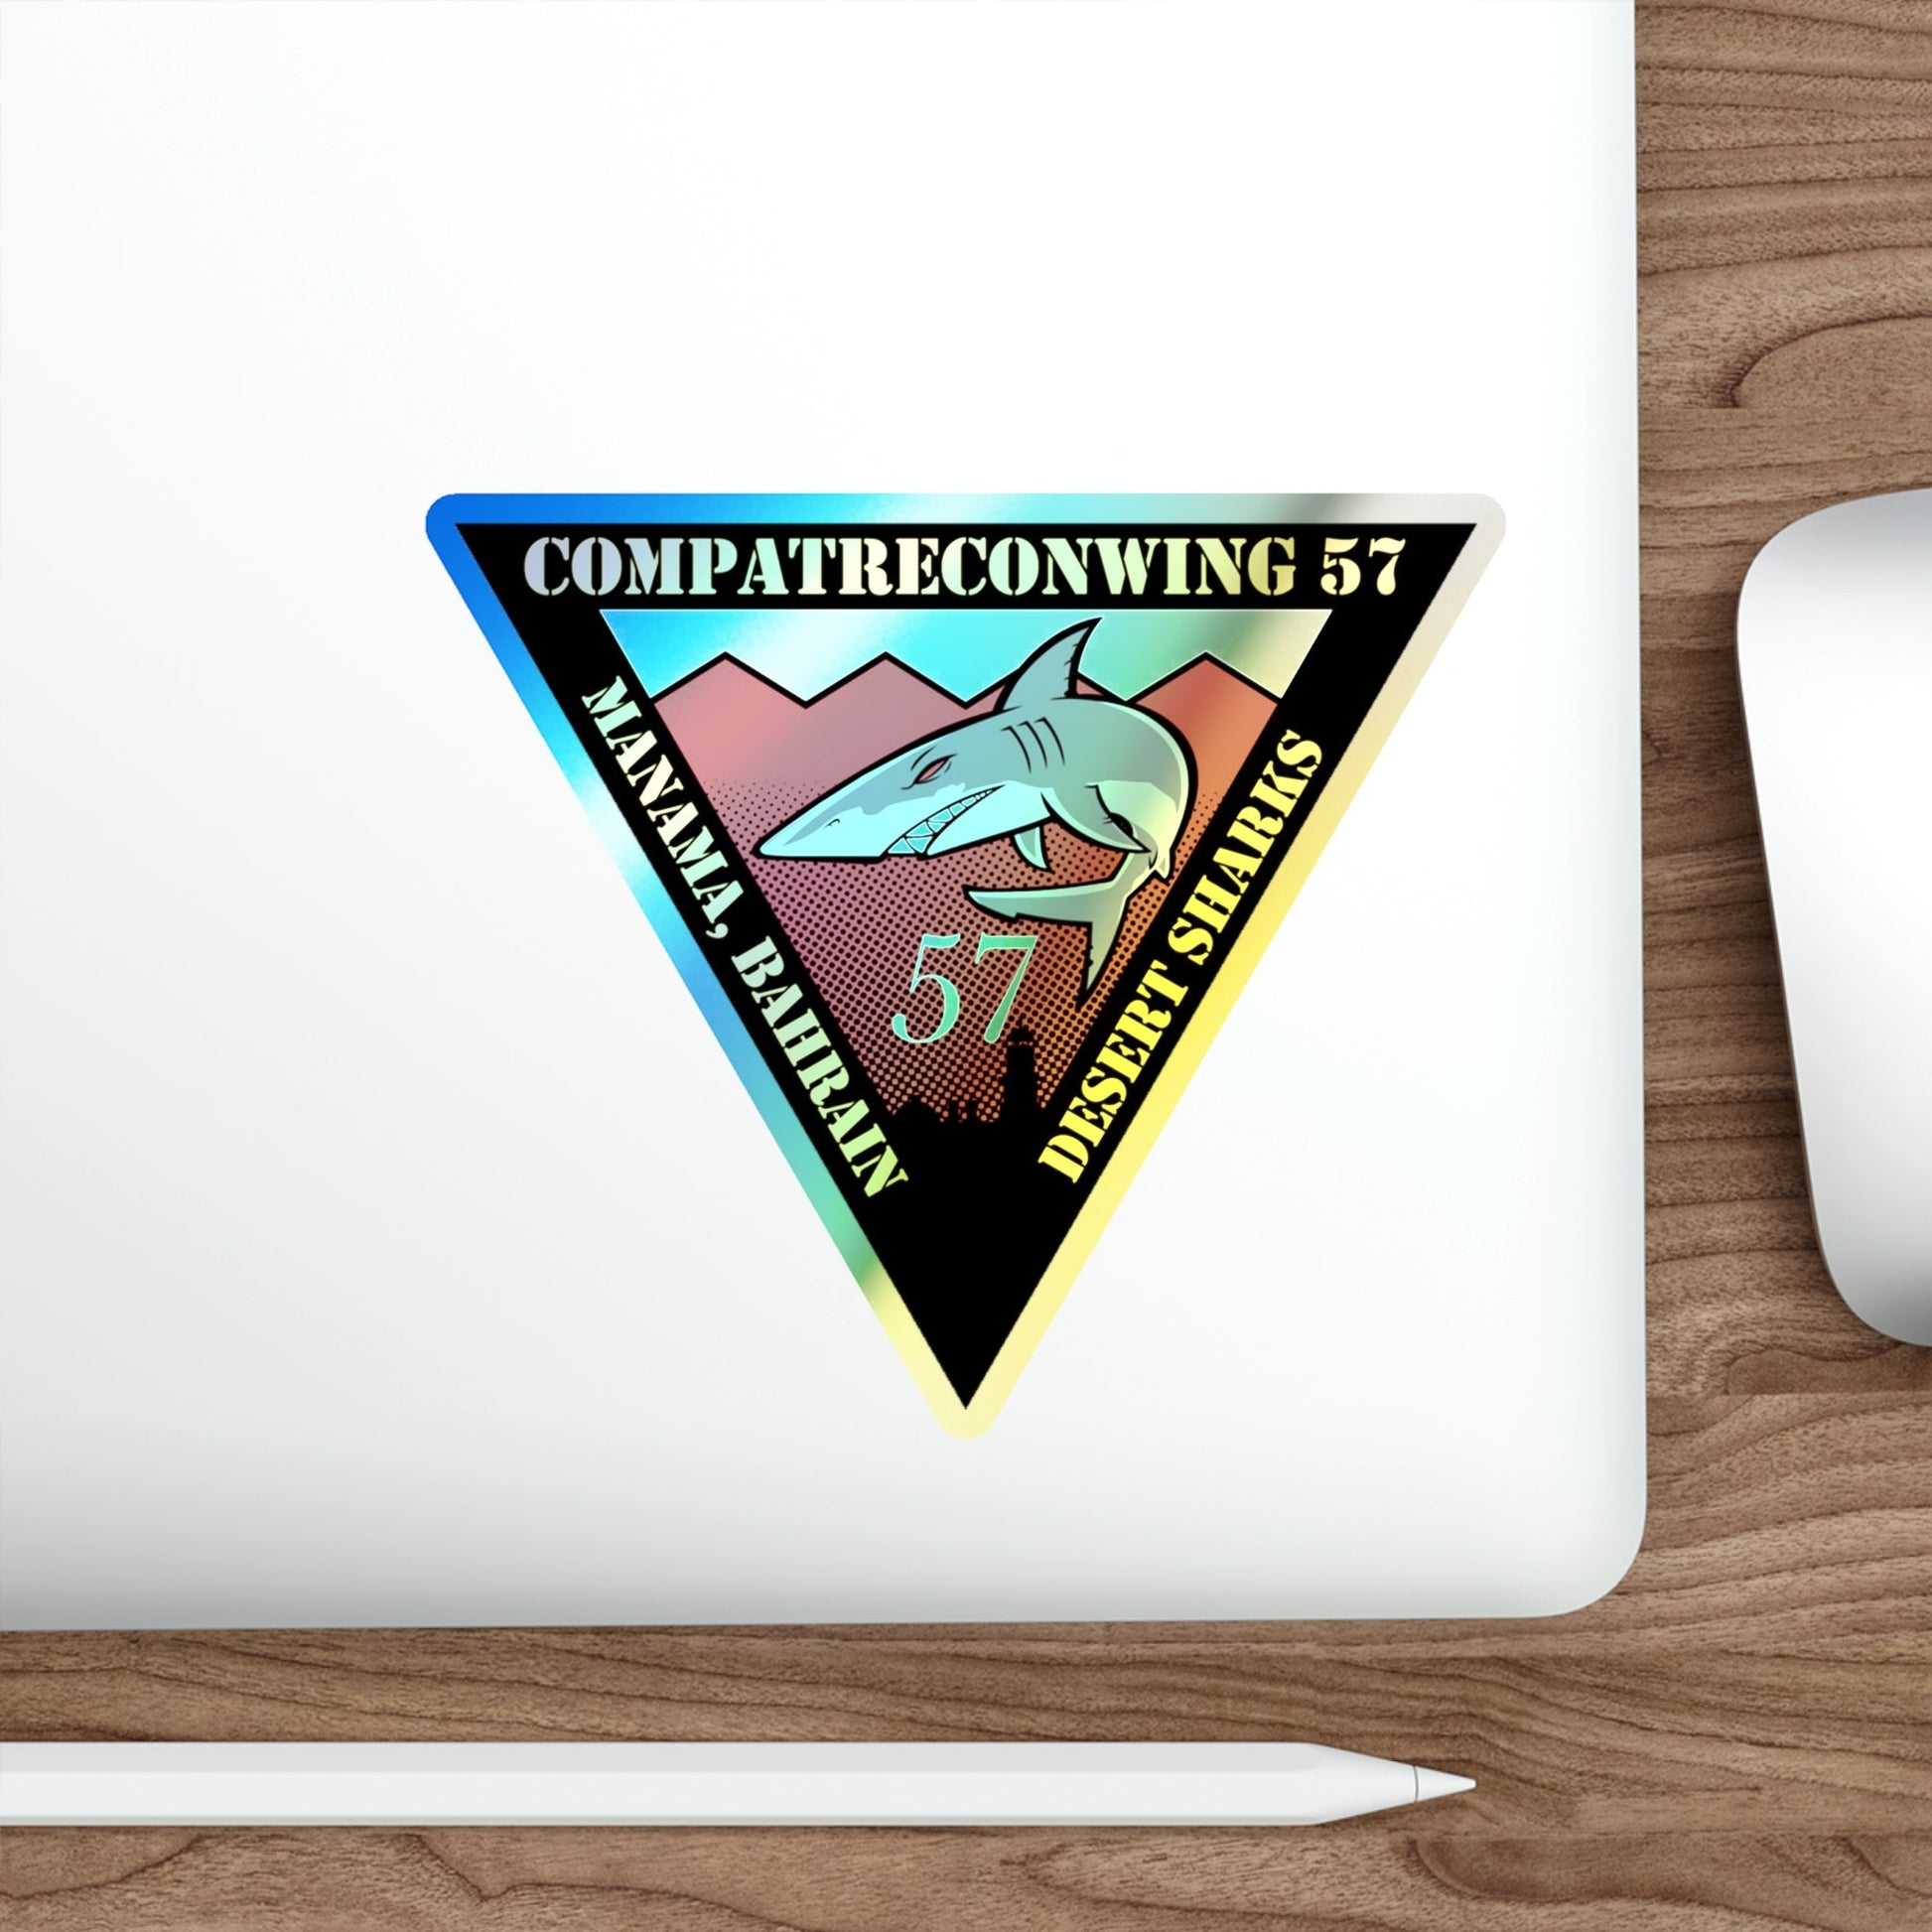 COMPATRECONWING 57 Commander Patrol and Reconnaissance Wing 57 (U.S. Navy) Holographic STICKER Die-Cut Vinyl Decal-The Sticker Space